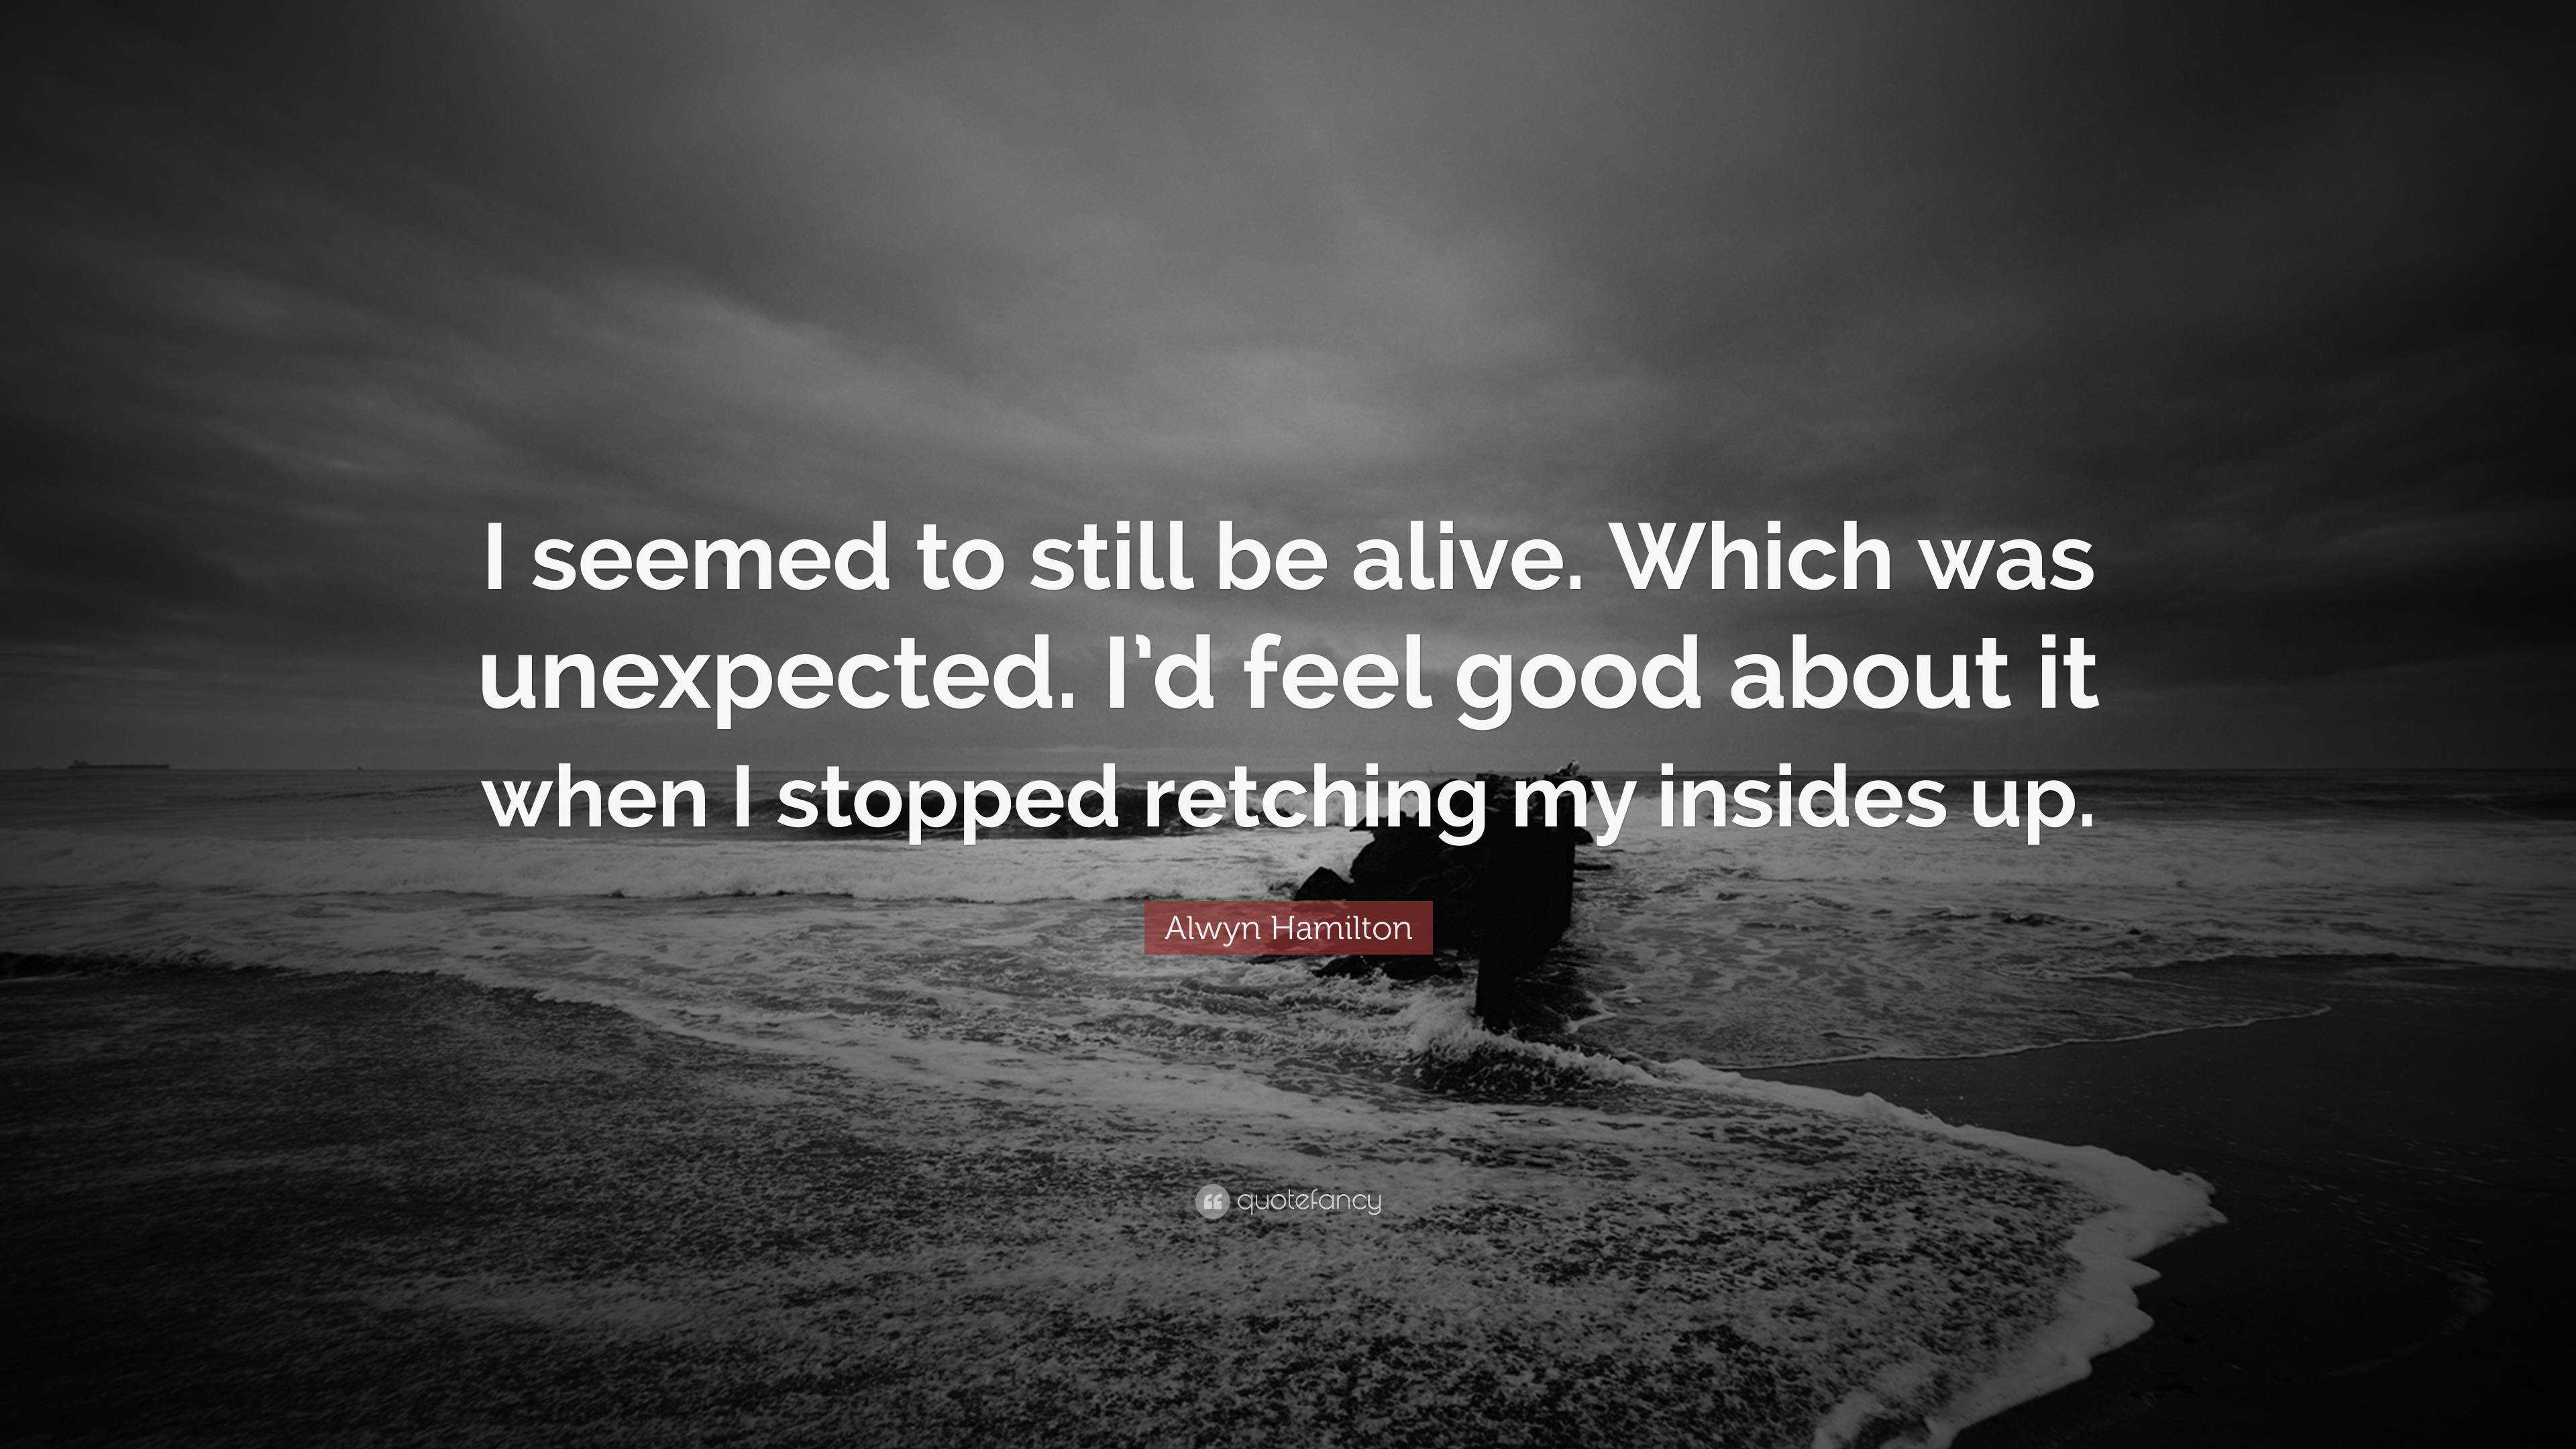 Alwyn Hamilton Quote: “I seemed to still be alive. Which was unexpected ...